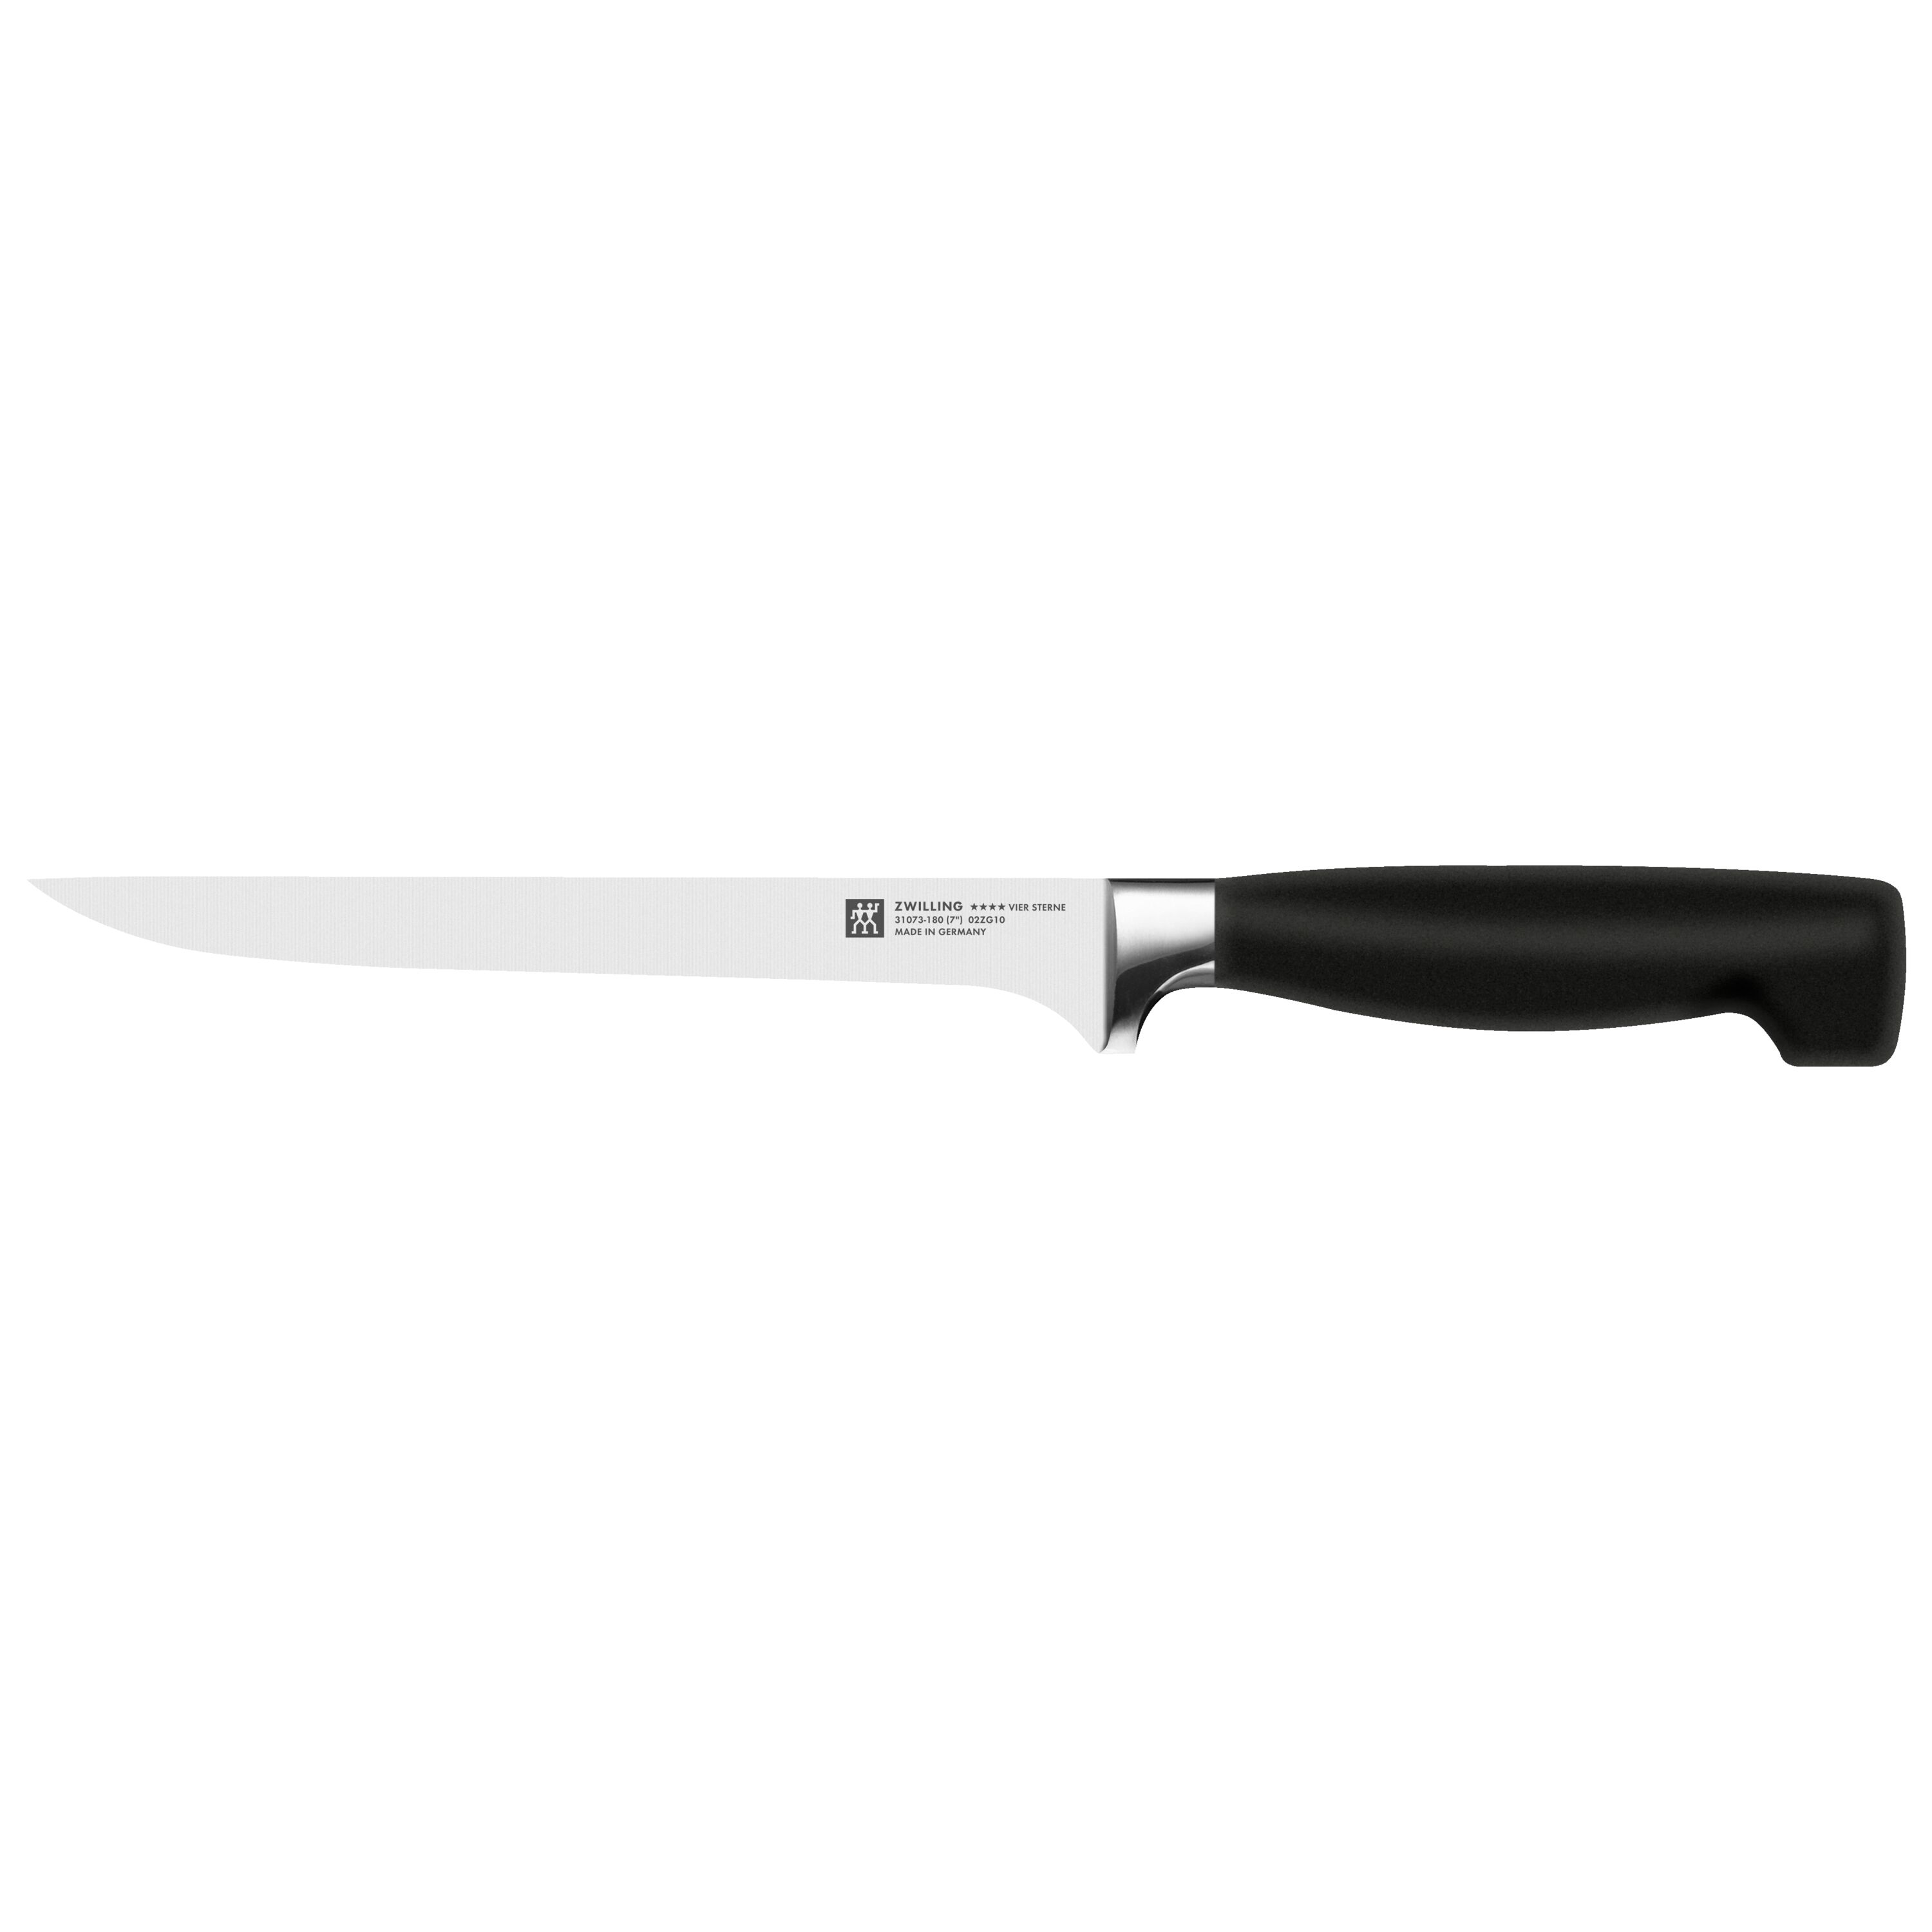 Twinny Kid's Chef's Knife by Zwilling at Swiss Knife Shop